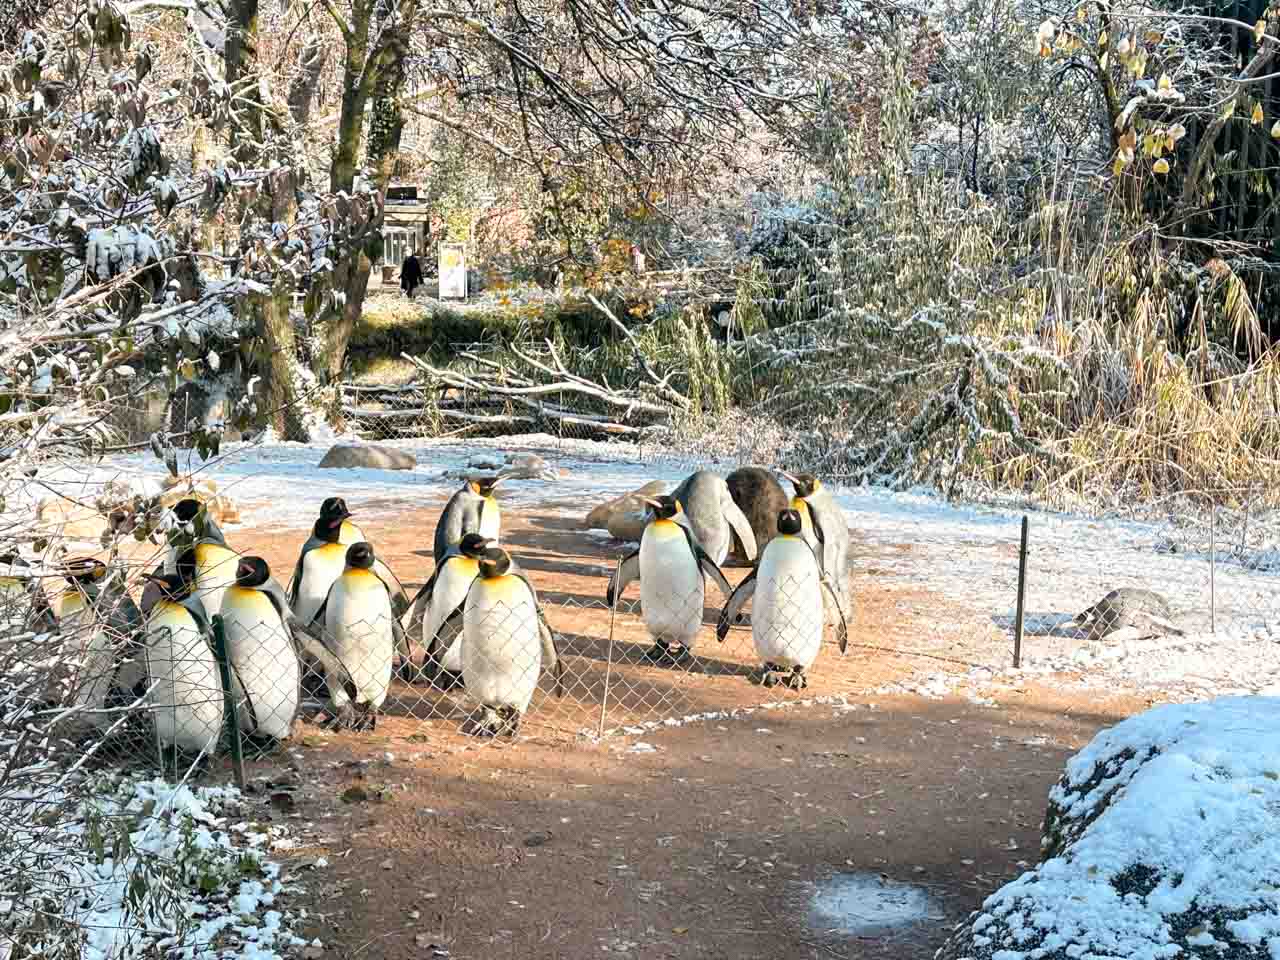 A group of King Penguins on a snowy path surrounded by frosty trees and bushes at Basel Zoo